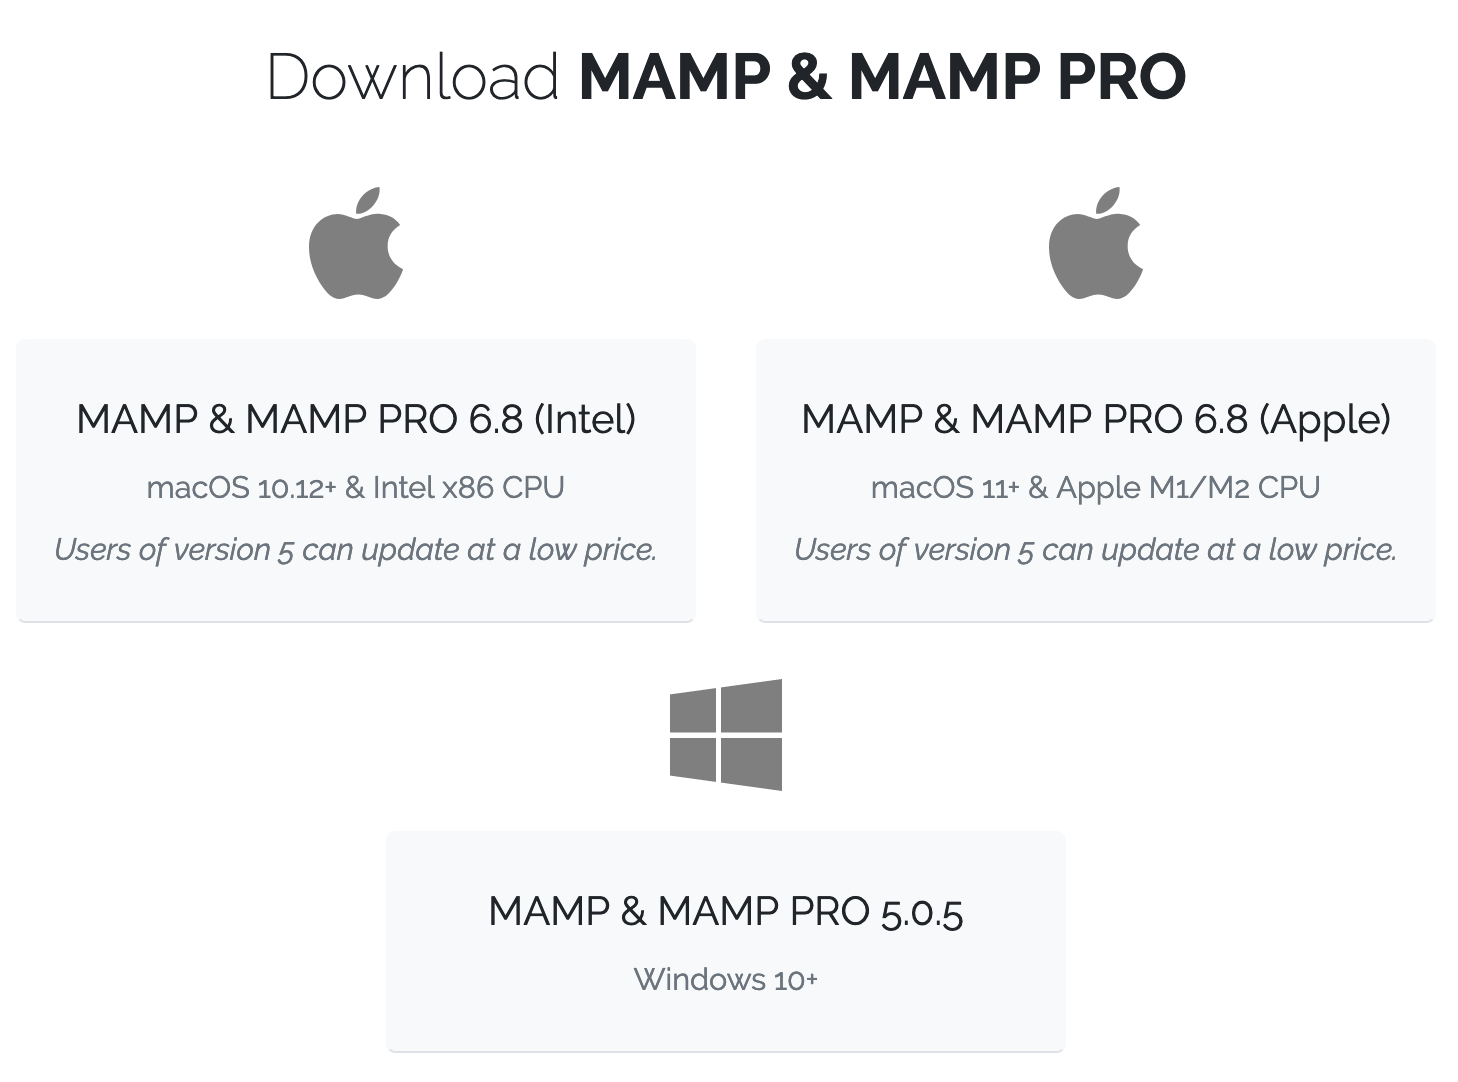 Download options shown on the MAMP website